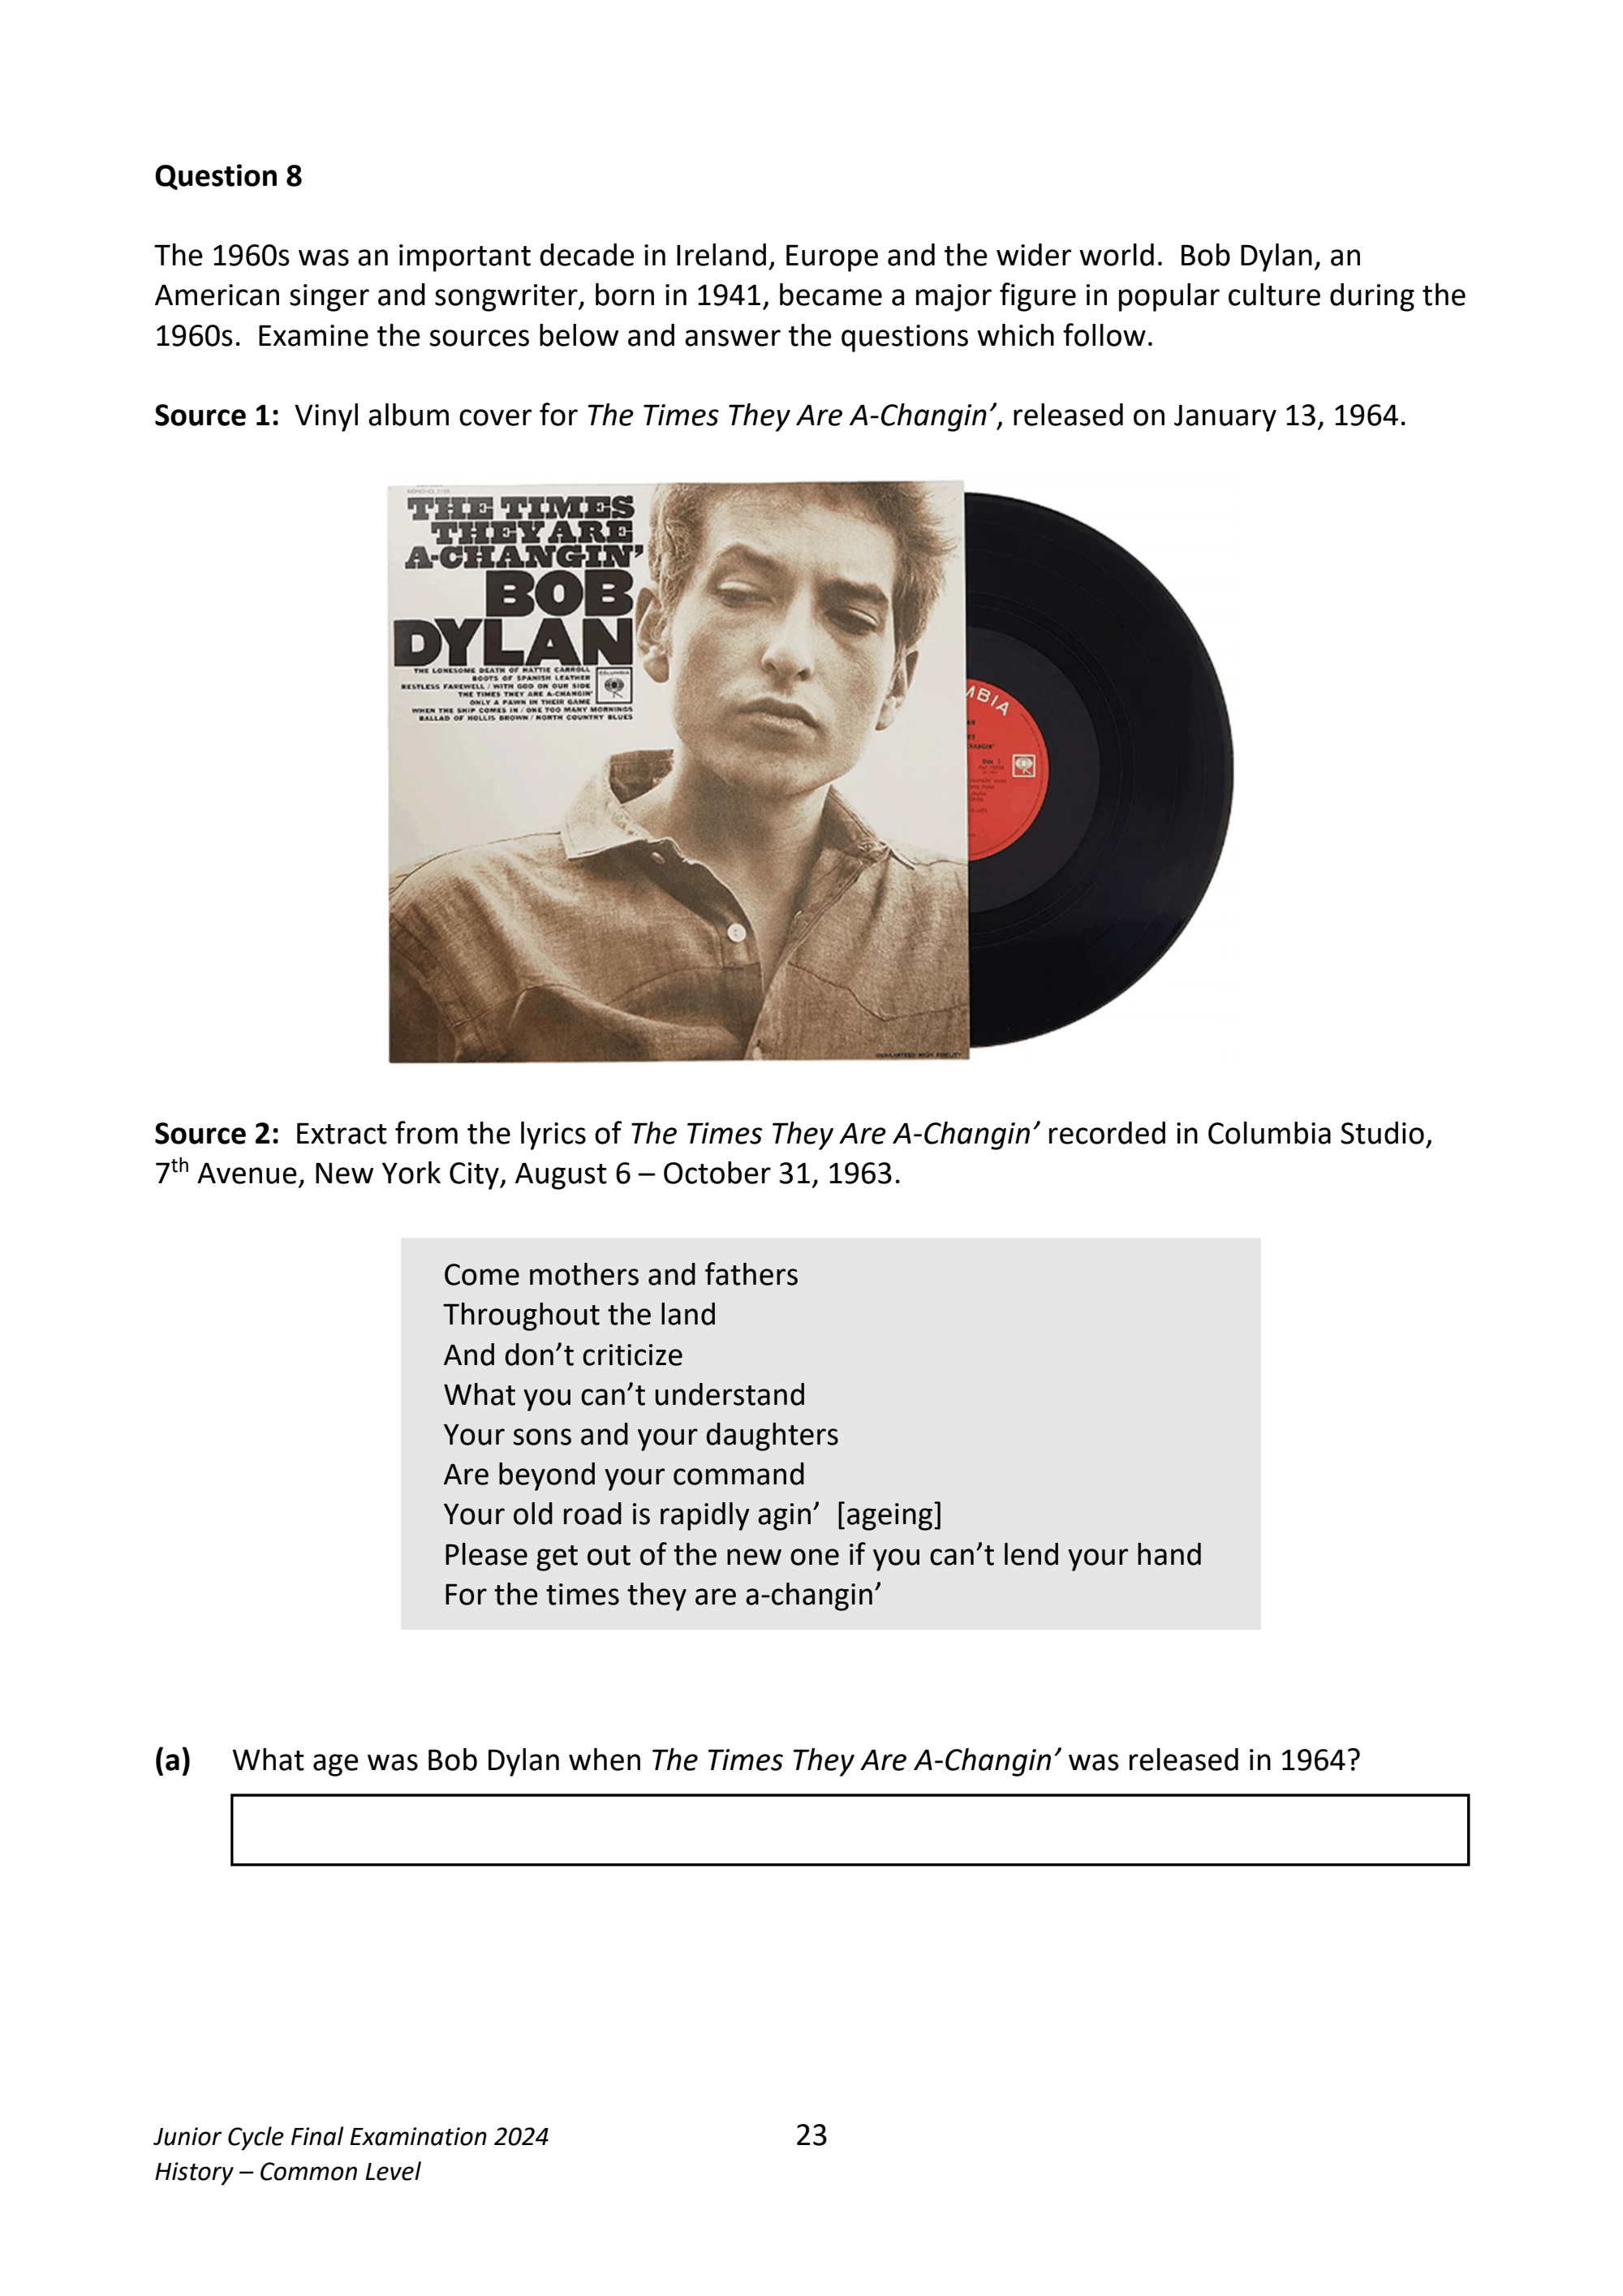 Page 23 of Junior Cycle history - Bob Dylan question